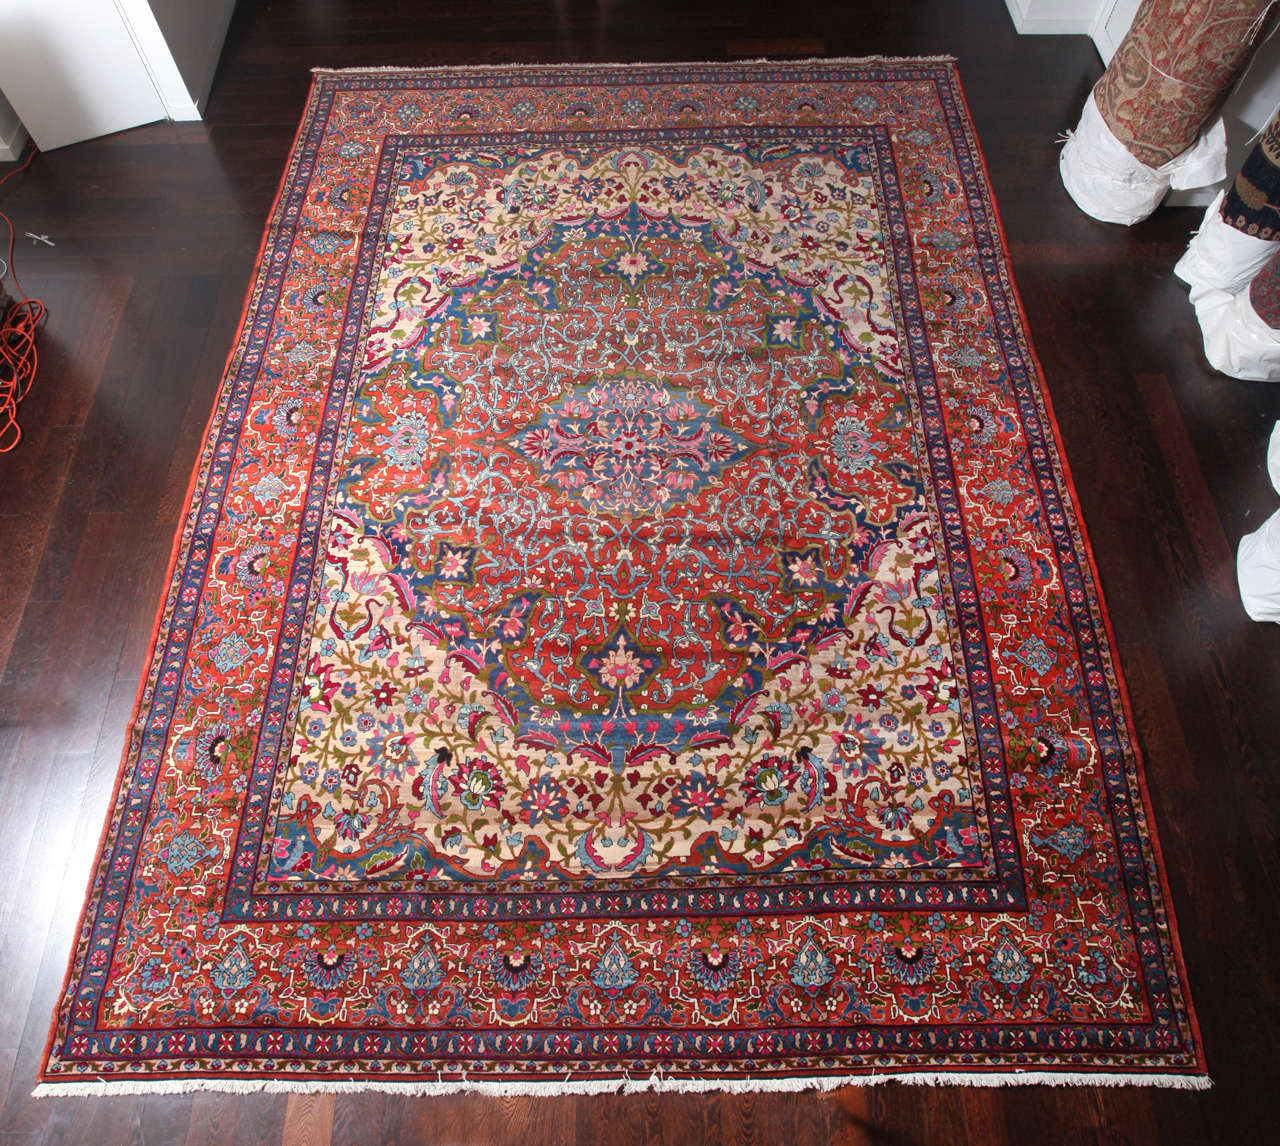 This Persian Kermanshah carpet features a Safavid Dynasty design and was created with a cotton warp and thread, hand-knotted handspun wool pile and natural vegetable dyes, circa 1880. Its design is highly innovative, with its medallion extending